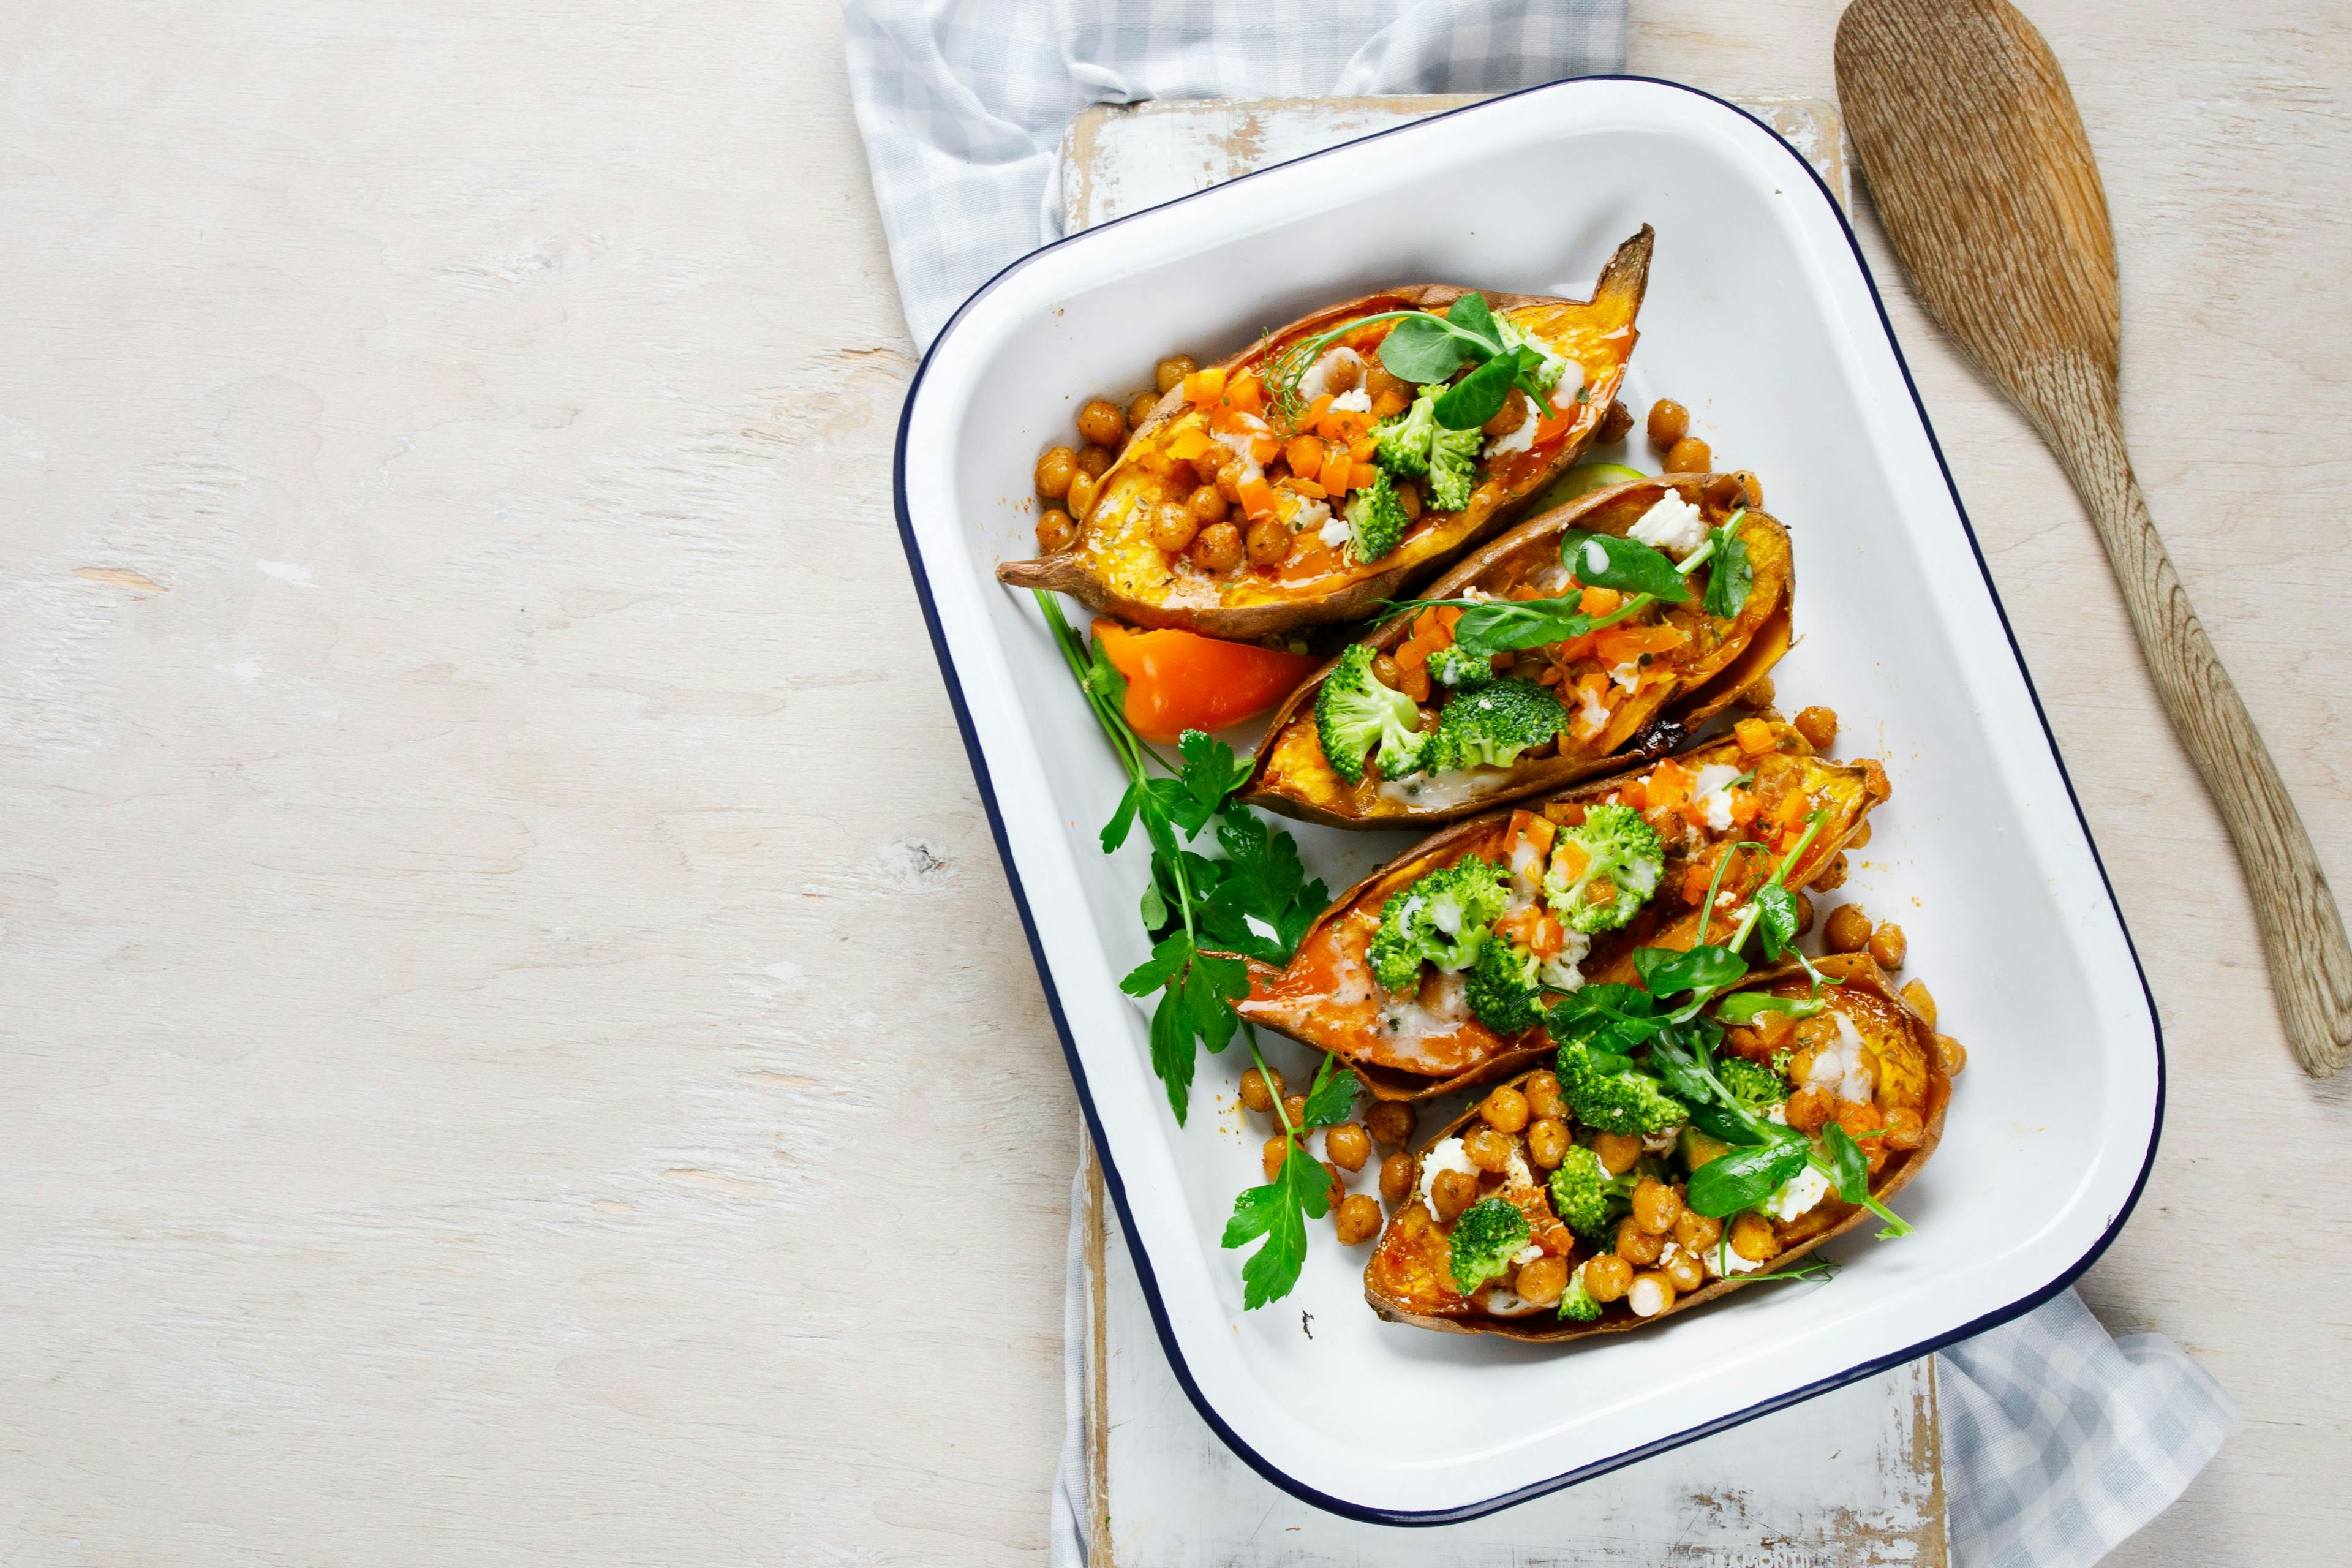 Stuffed sweet potato with spiced chickpea, dressing and herbs. | Image Credit: bit24 © - stock.adobe.com. 